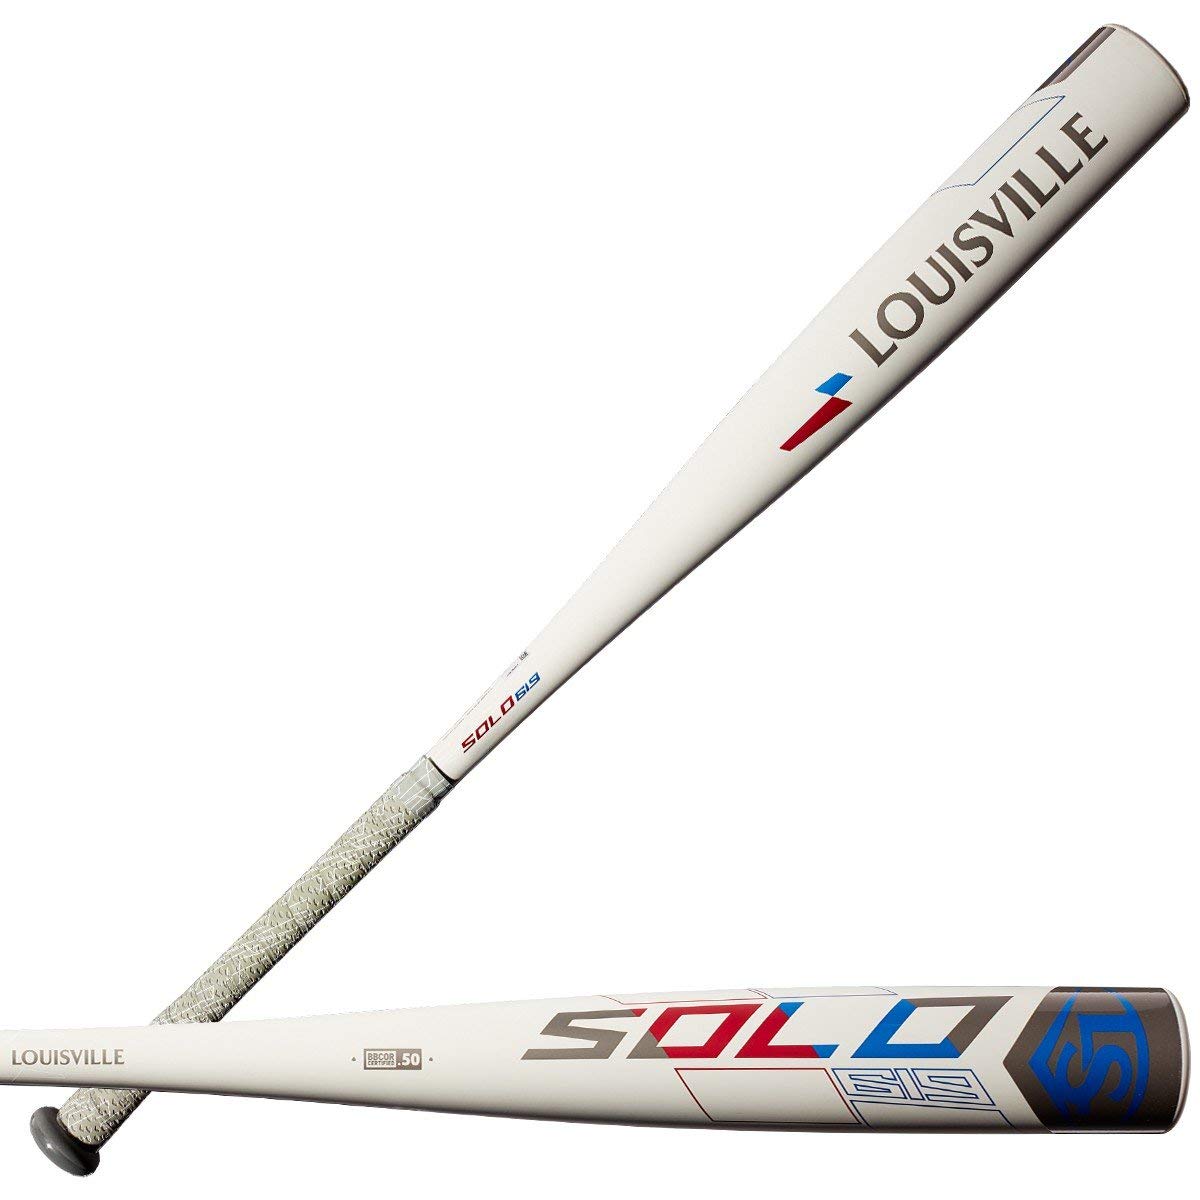 louisville-slugger-2019-solo-619-3-bbcor-baseball-bat-30-inch-27-oz WTLBBS619B330 Louisville 887768712754 The new Solo 619 brings the speed you need in your